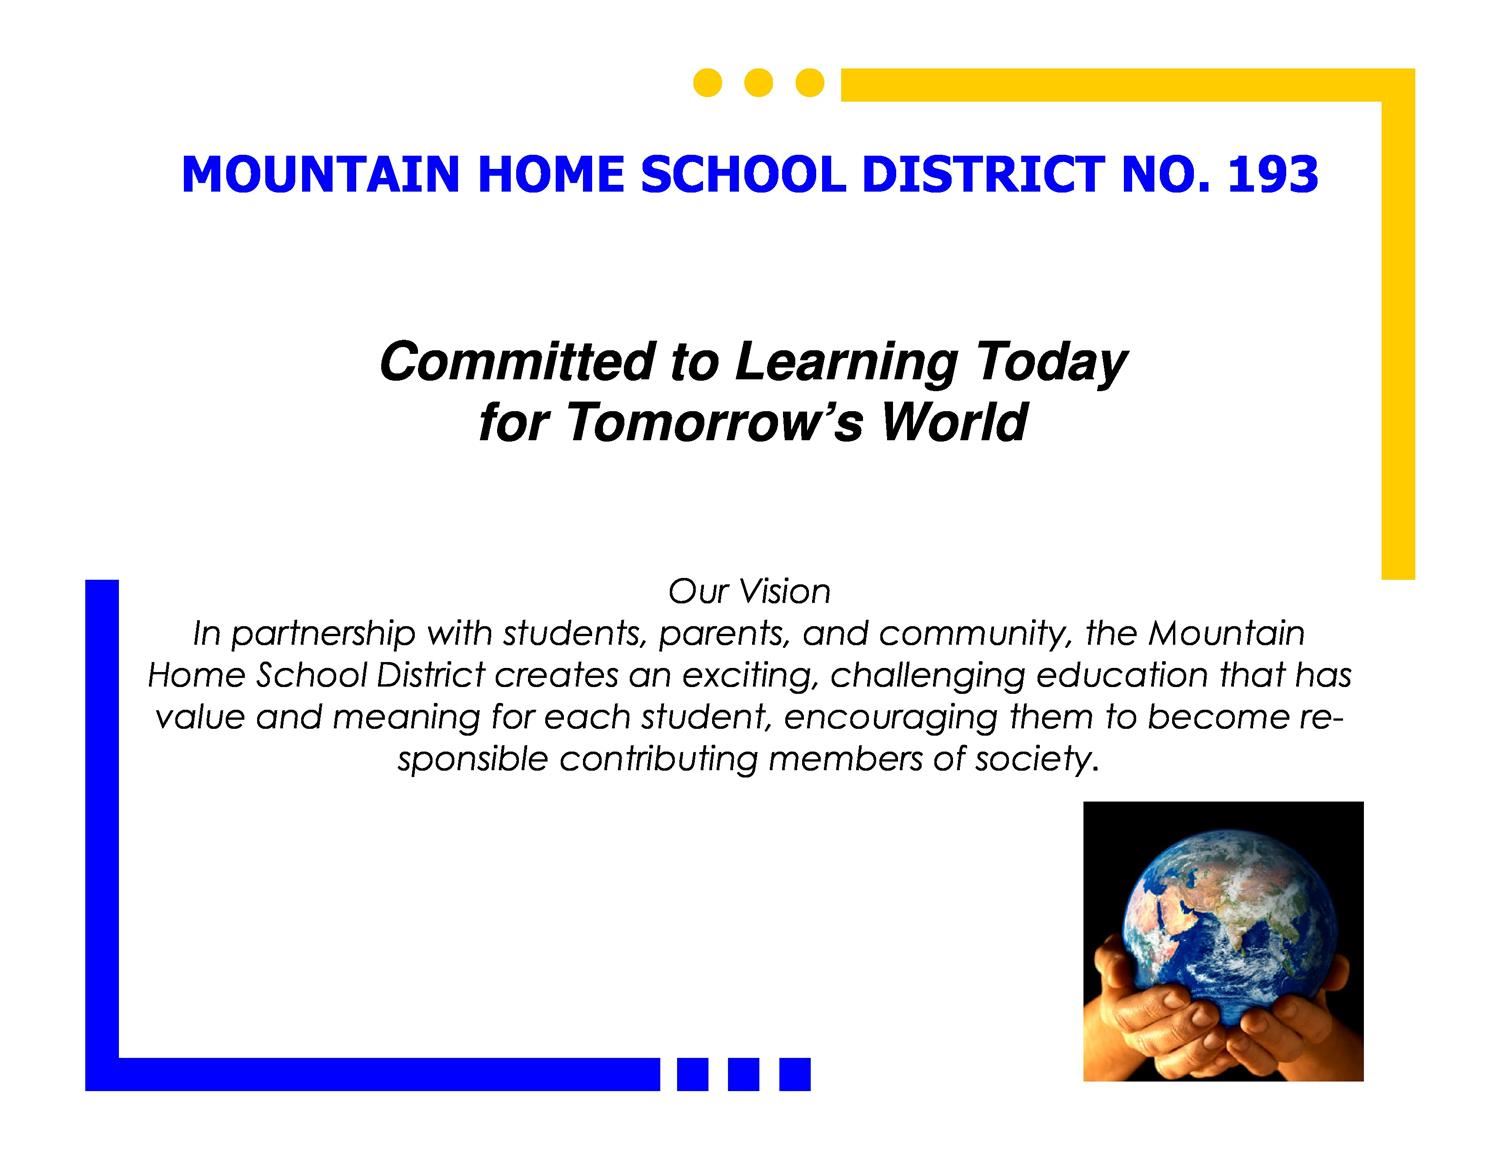  Mountain Home Mission Statement